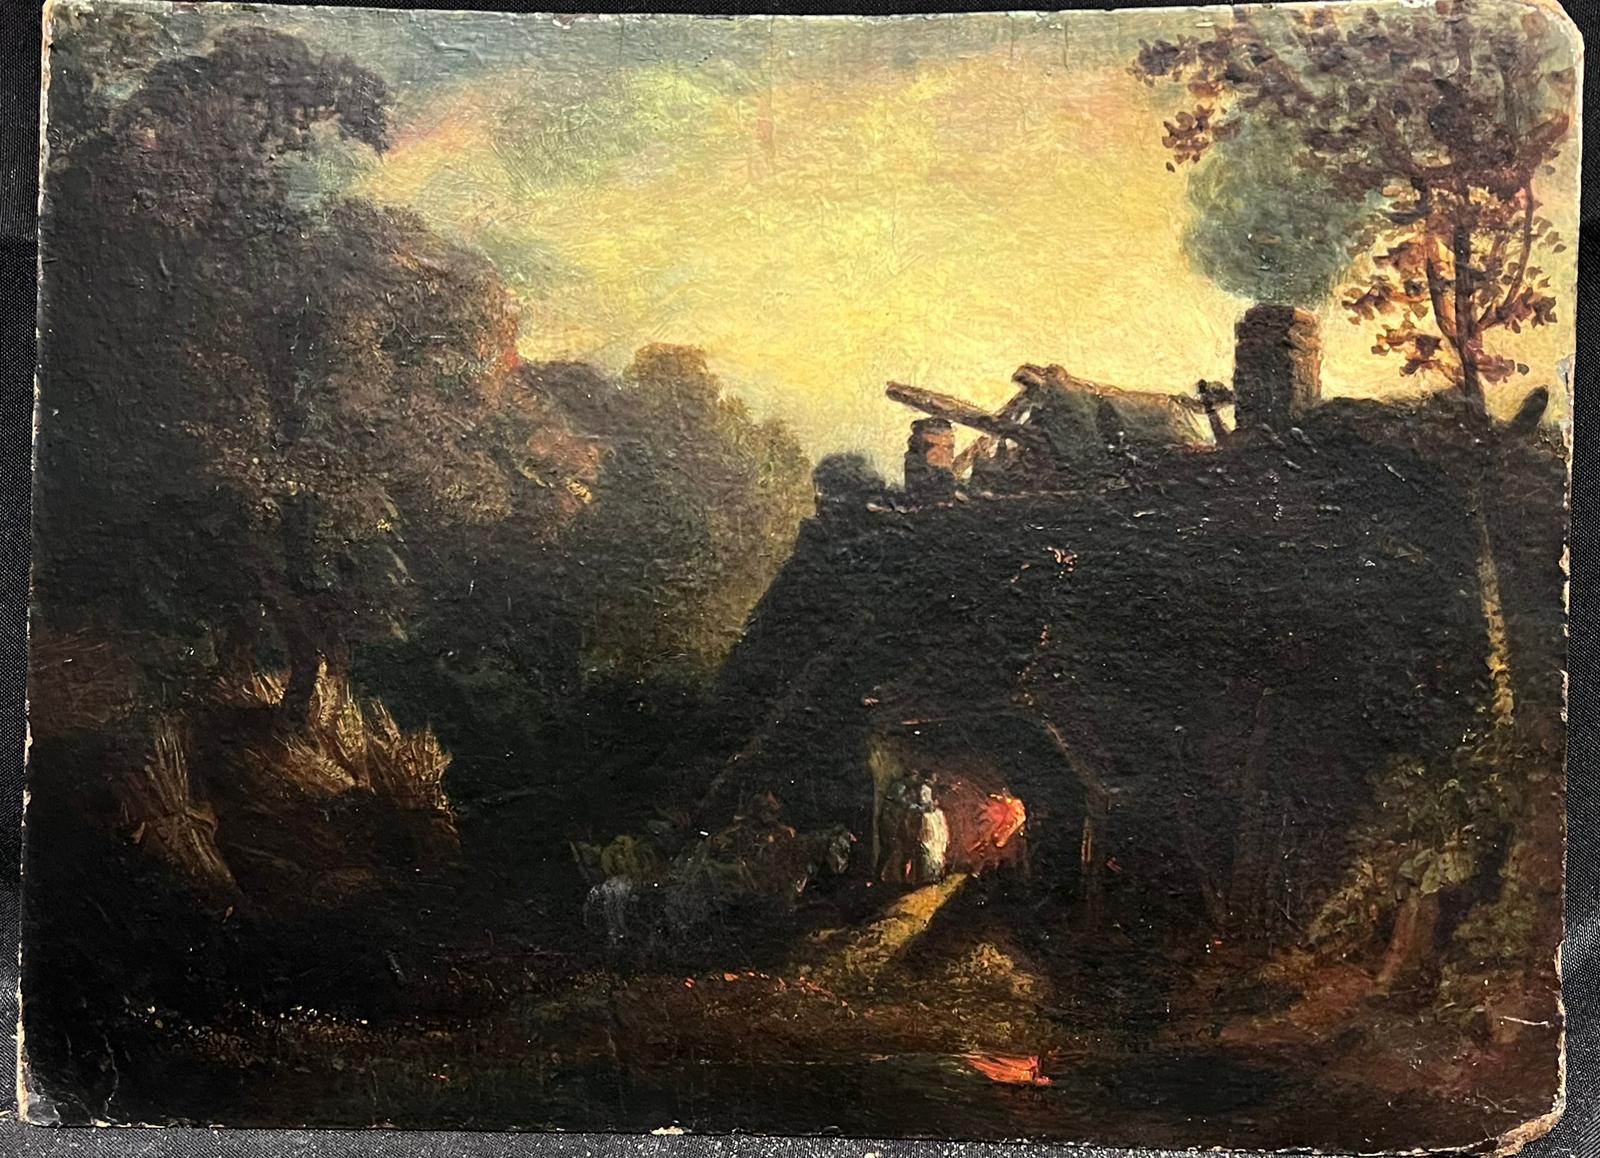 The Blacksmiths Forge
British artist, late 18th century
Circle of Julius Caesar Ibbetson (1759-1817)
oil on board, unframed
board: 11 x 14.5 inches
provenance: private collection, England
condition: overall good and sound condition, minor blistering